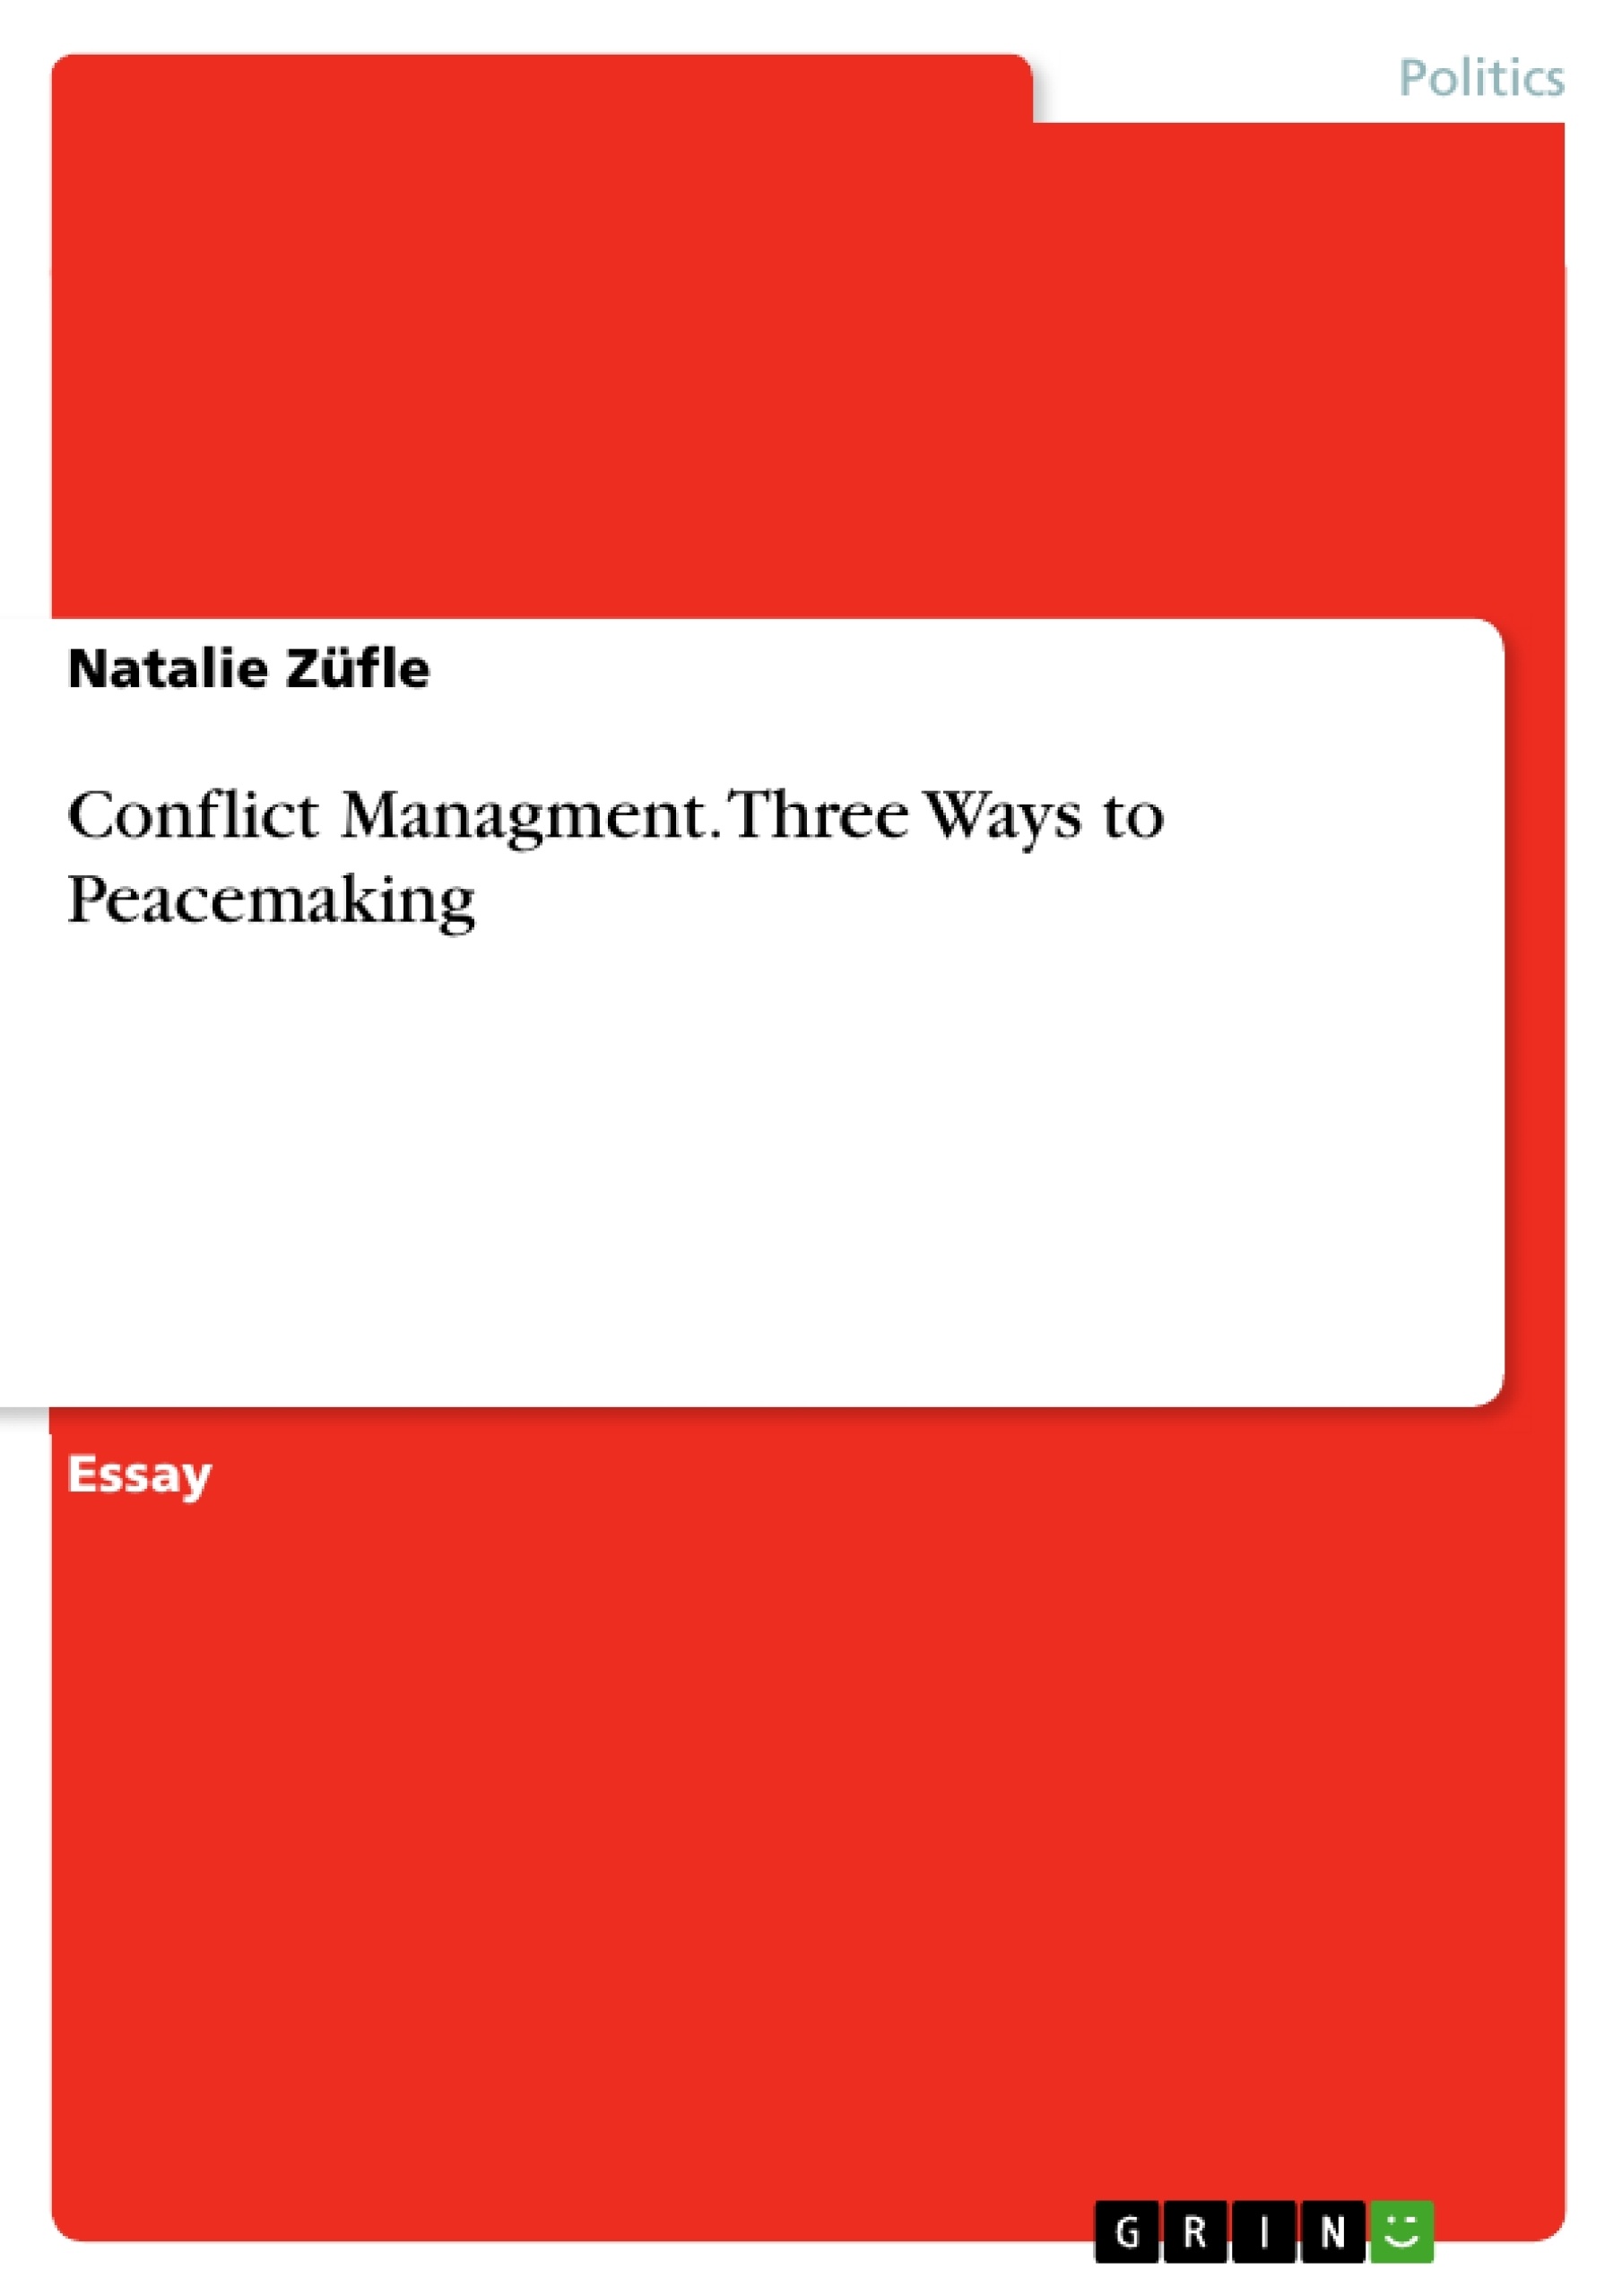 Título: Conflict Managment. Three Ways to Peacemaking